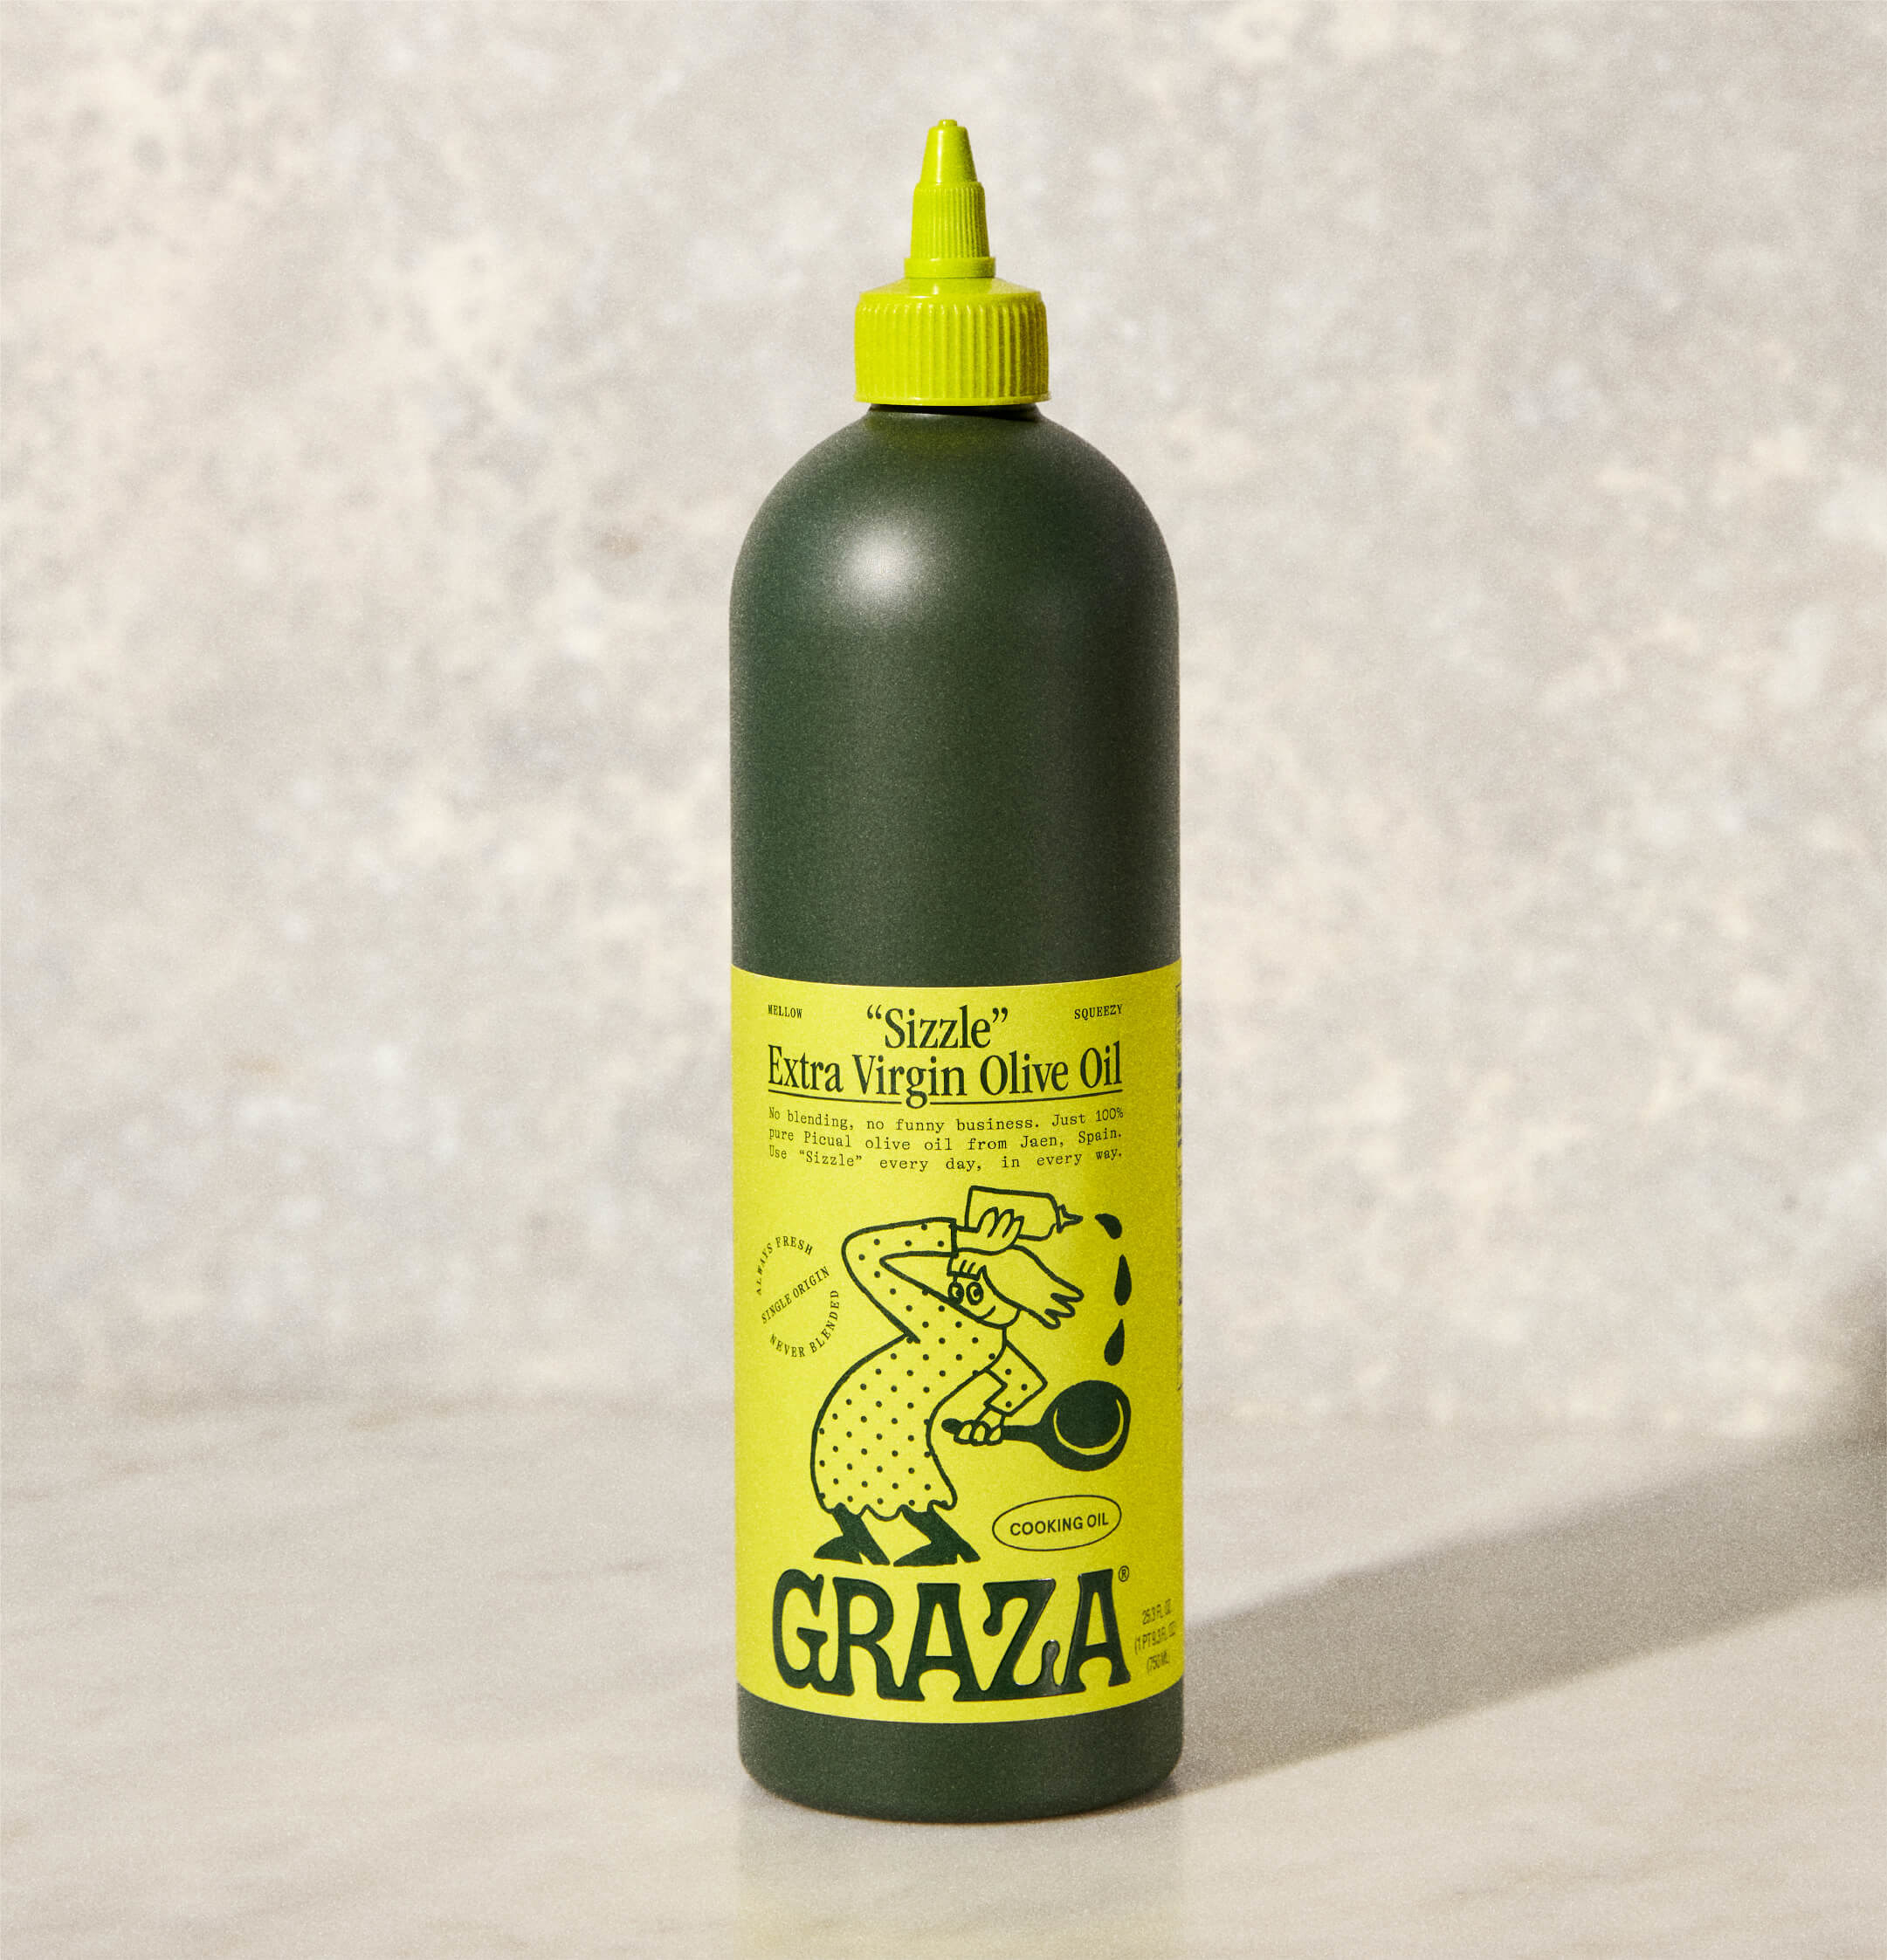 The olive oil in its squeezable container